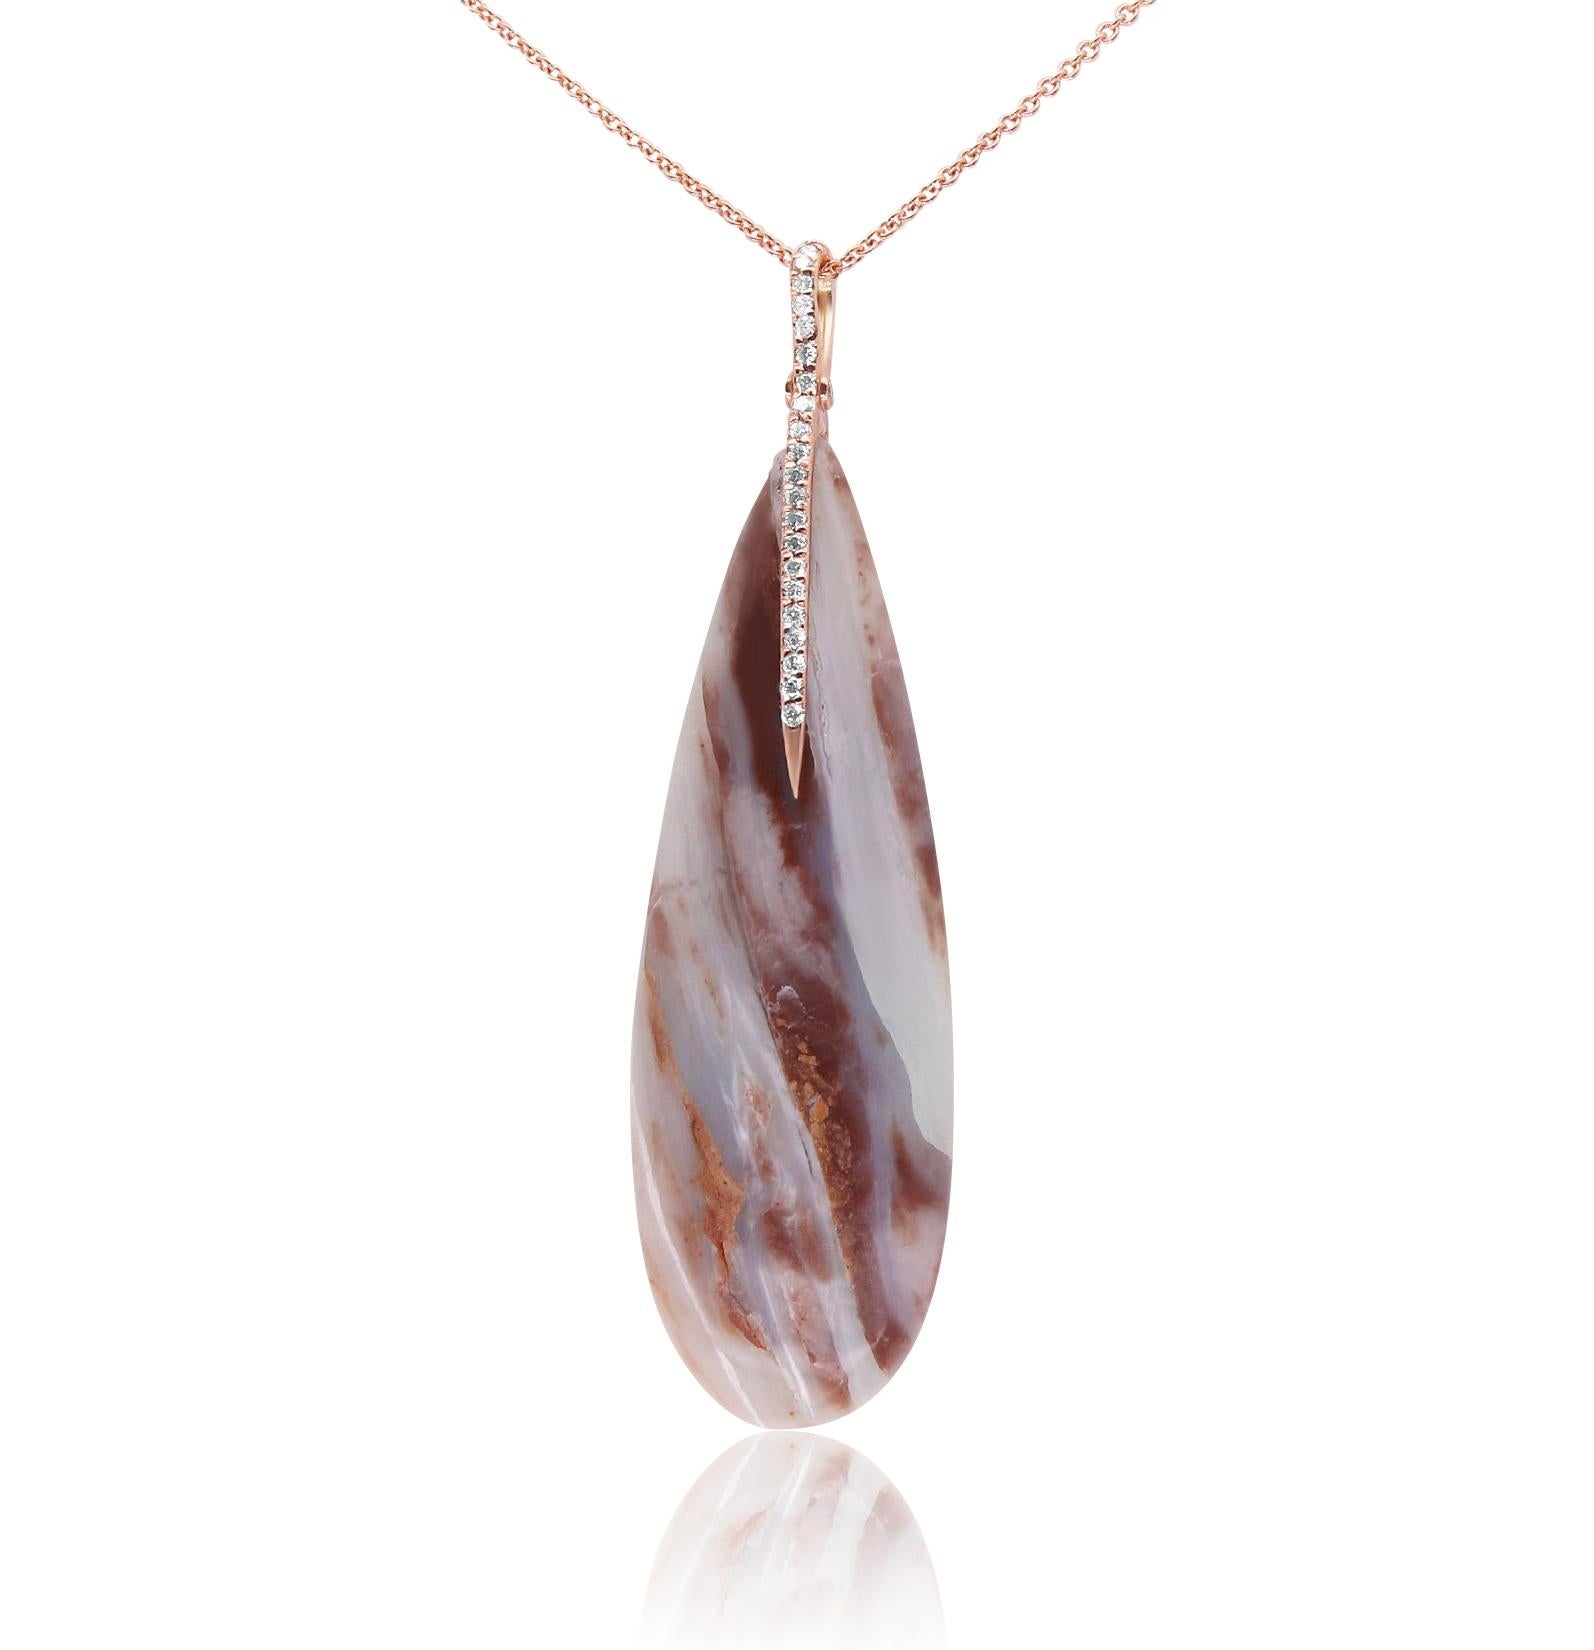 Material: 14K Rose Gold
Center Stone Details: 1 Pear Shaped Agate at 36.30 Carats Total 
Diamond Details: 23 Round White Diamonds at 0.14 Carats Total - Clarity: SI / Color: H-I

Fine one-of-a-kind craftsmanship meets incredible quality in this